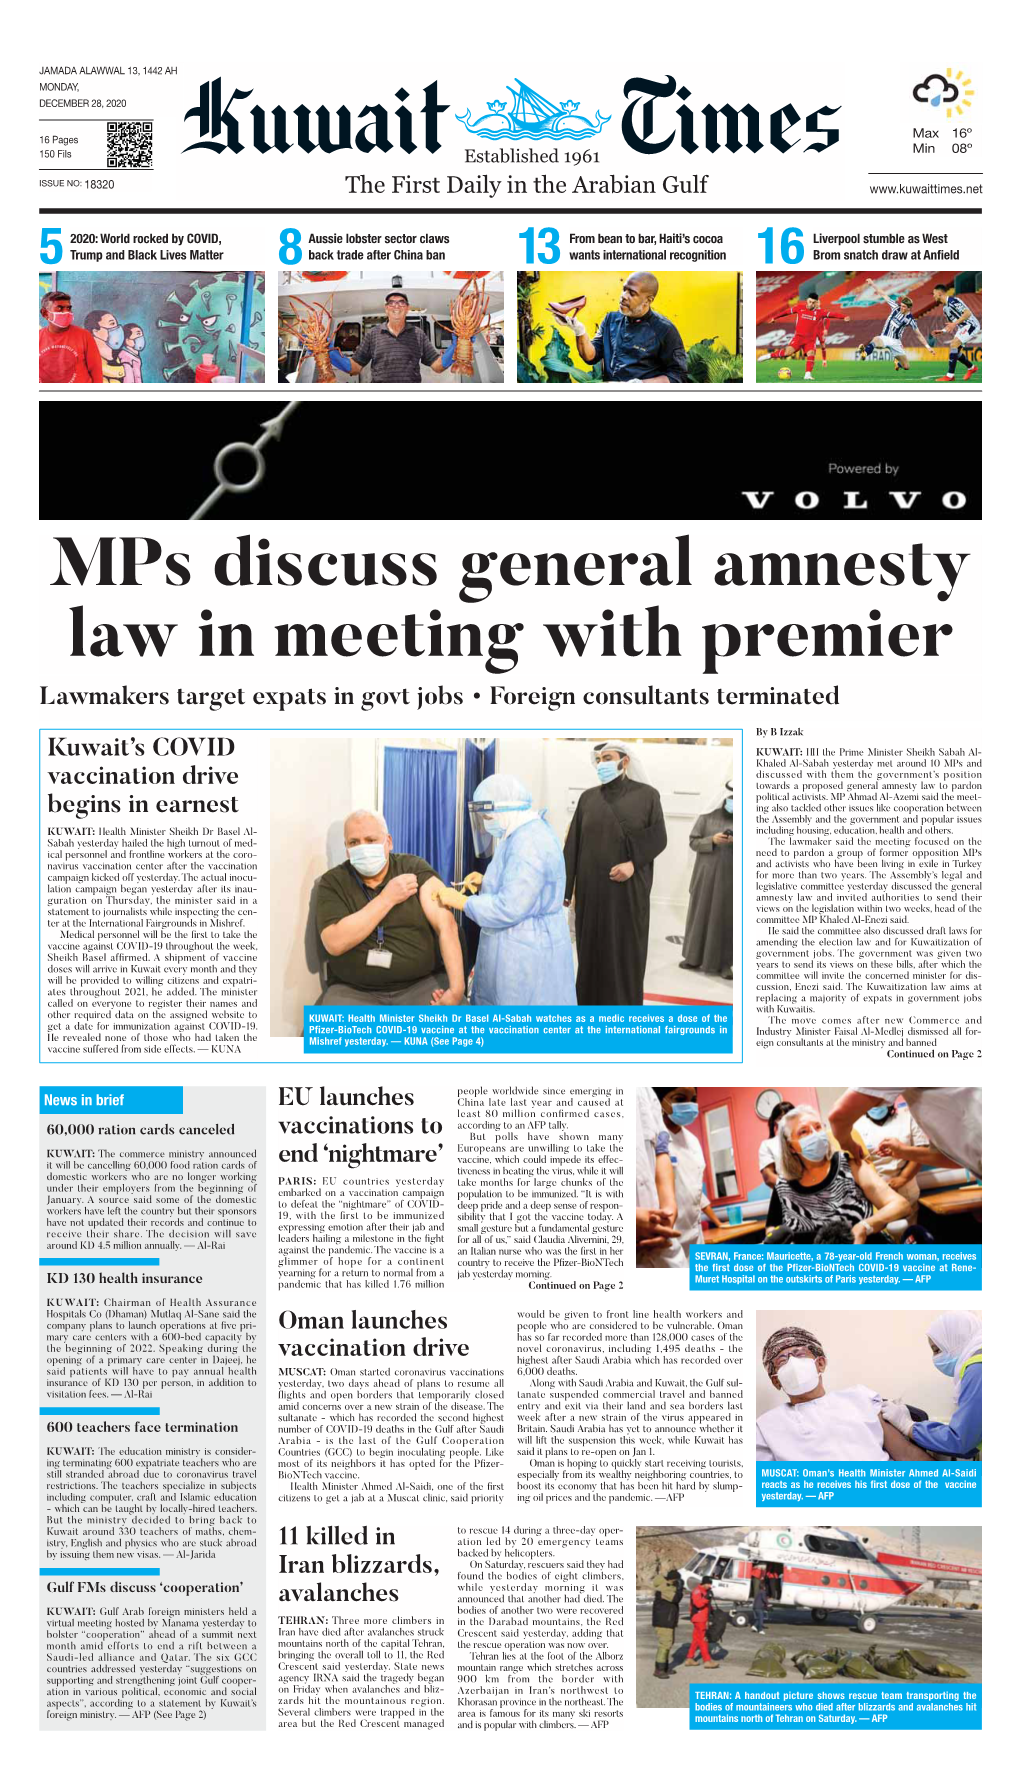 Mps Discuss General Amnesty Law in Meeting with Premier Lawmakers Target Expats in Govt Jobs • Foreign Consultants Terminated